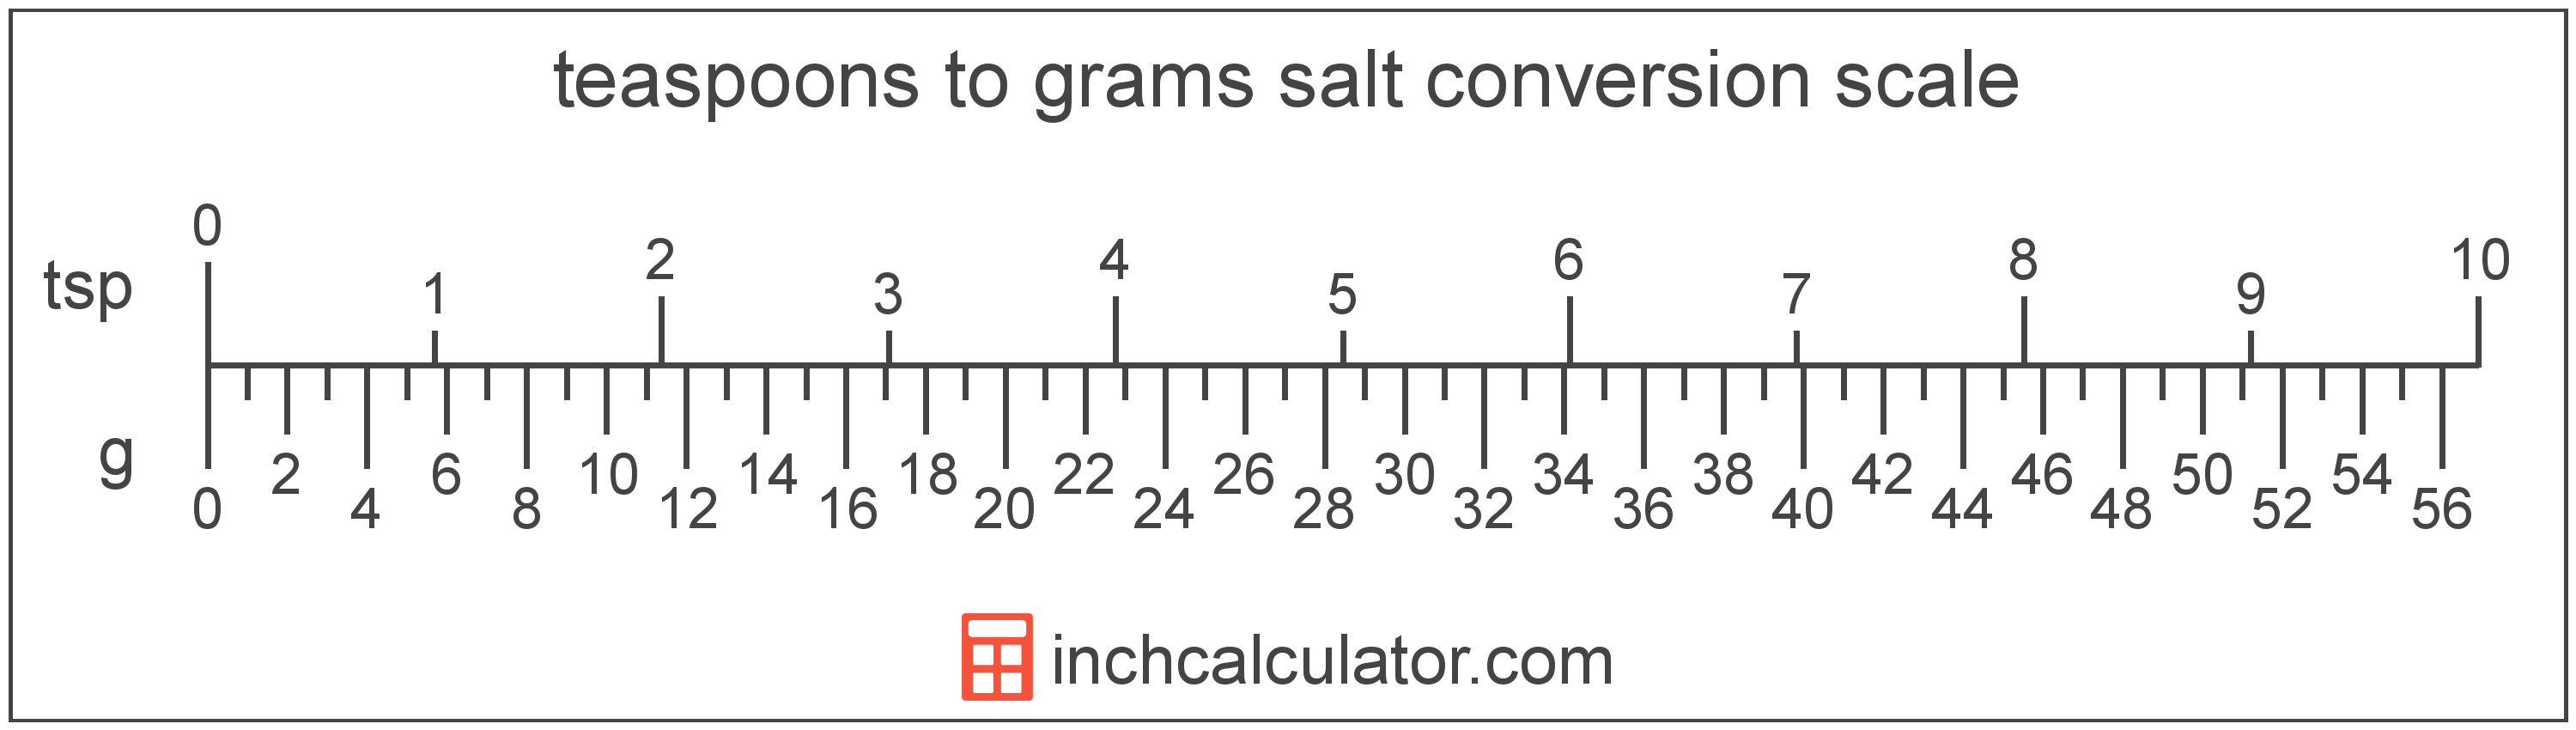 conversion scale showing grams and equivalent teaspoons salt volume values